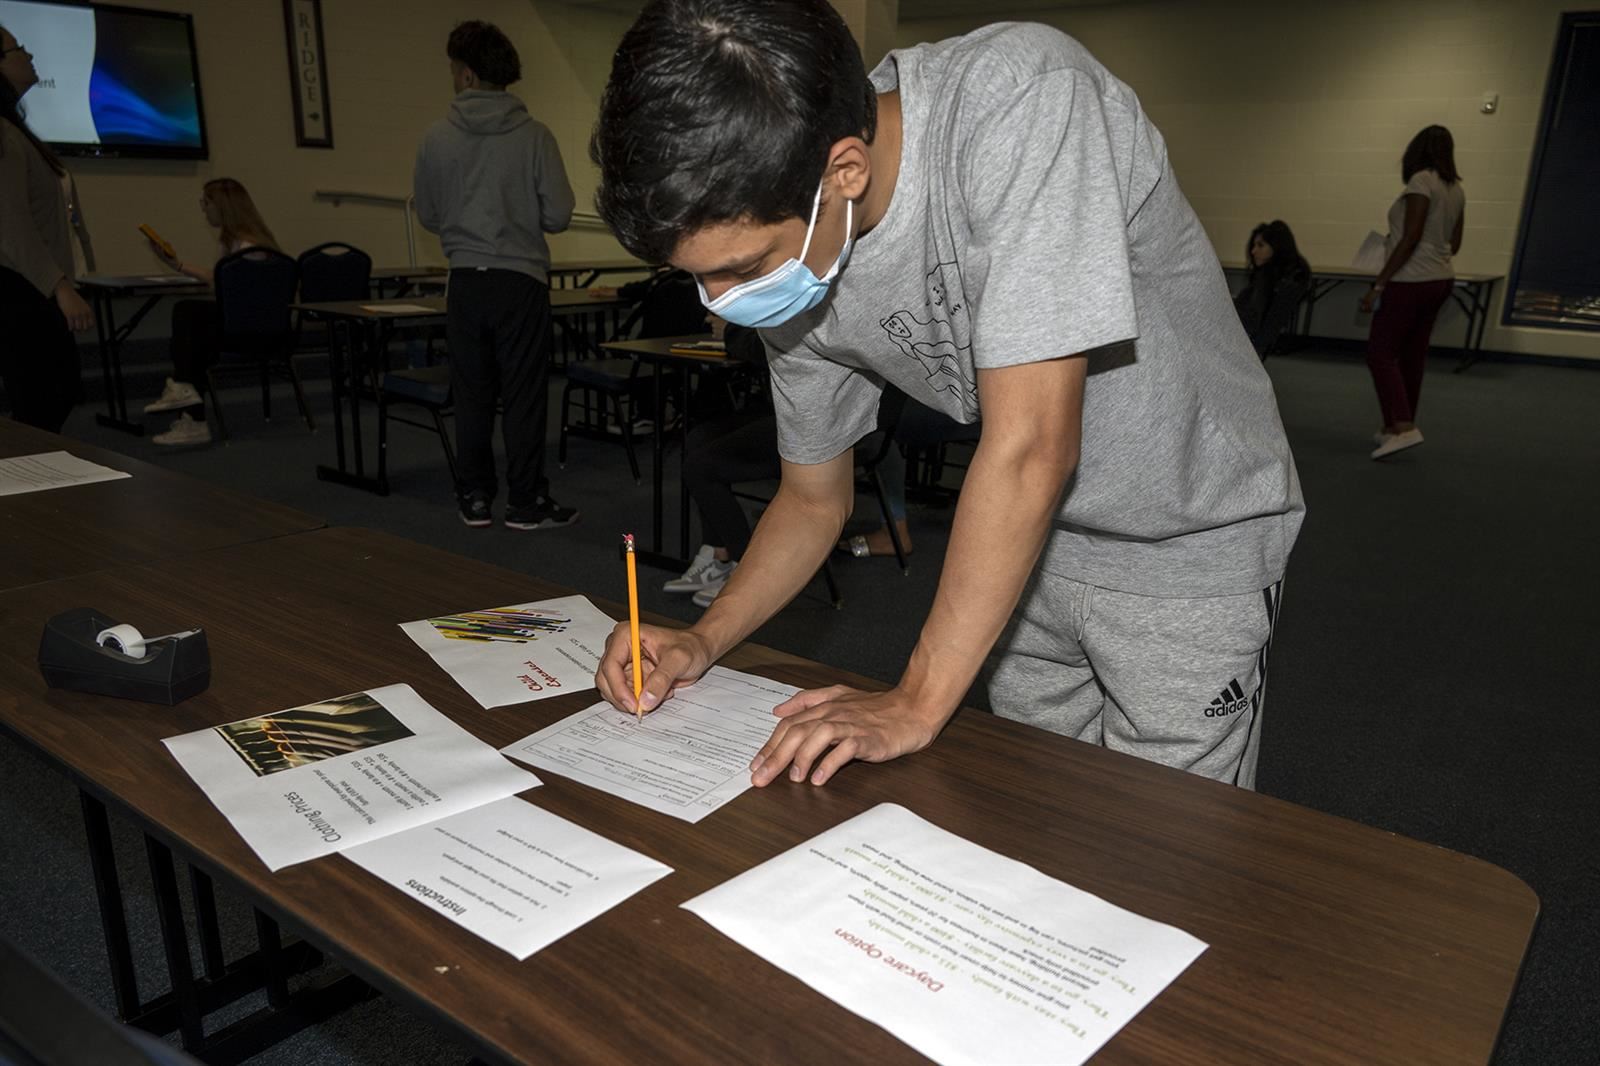 Cypress Ridge senior Steven Long works on his budget during a Budget Assessment lesson for his MMA class.